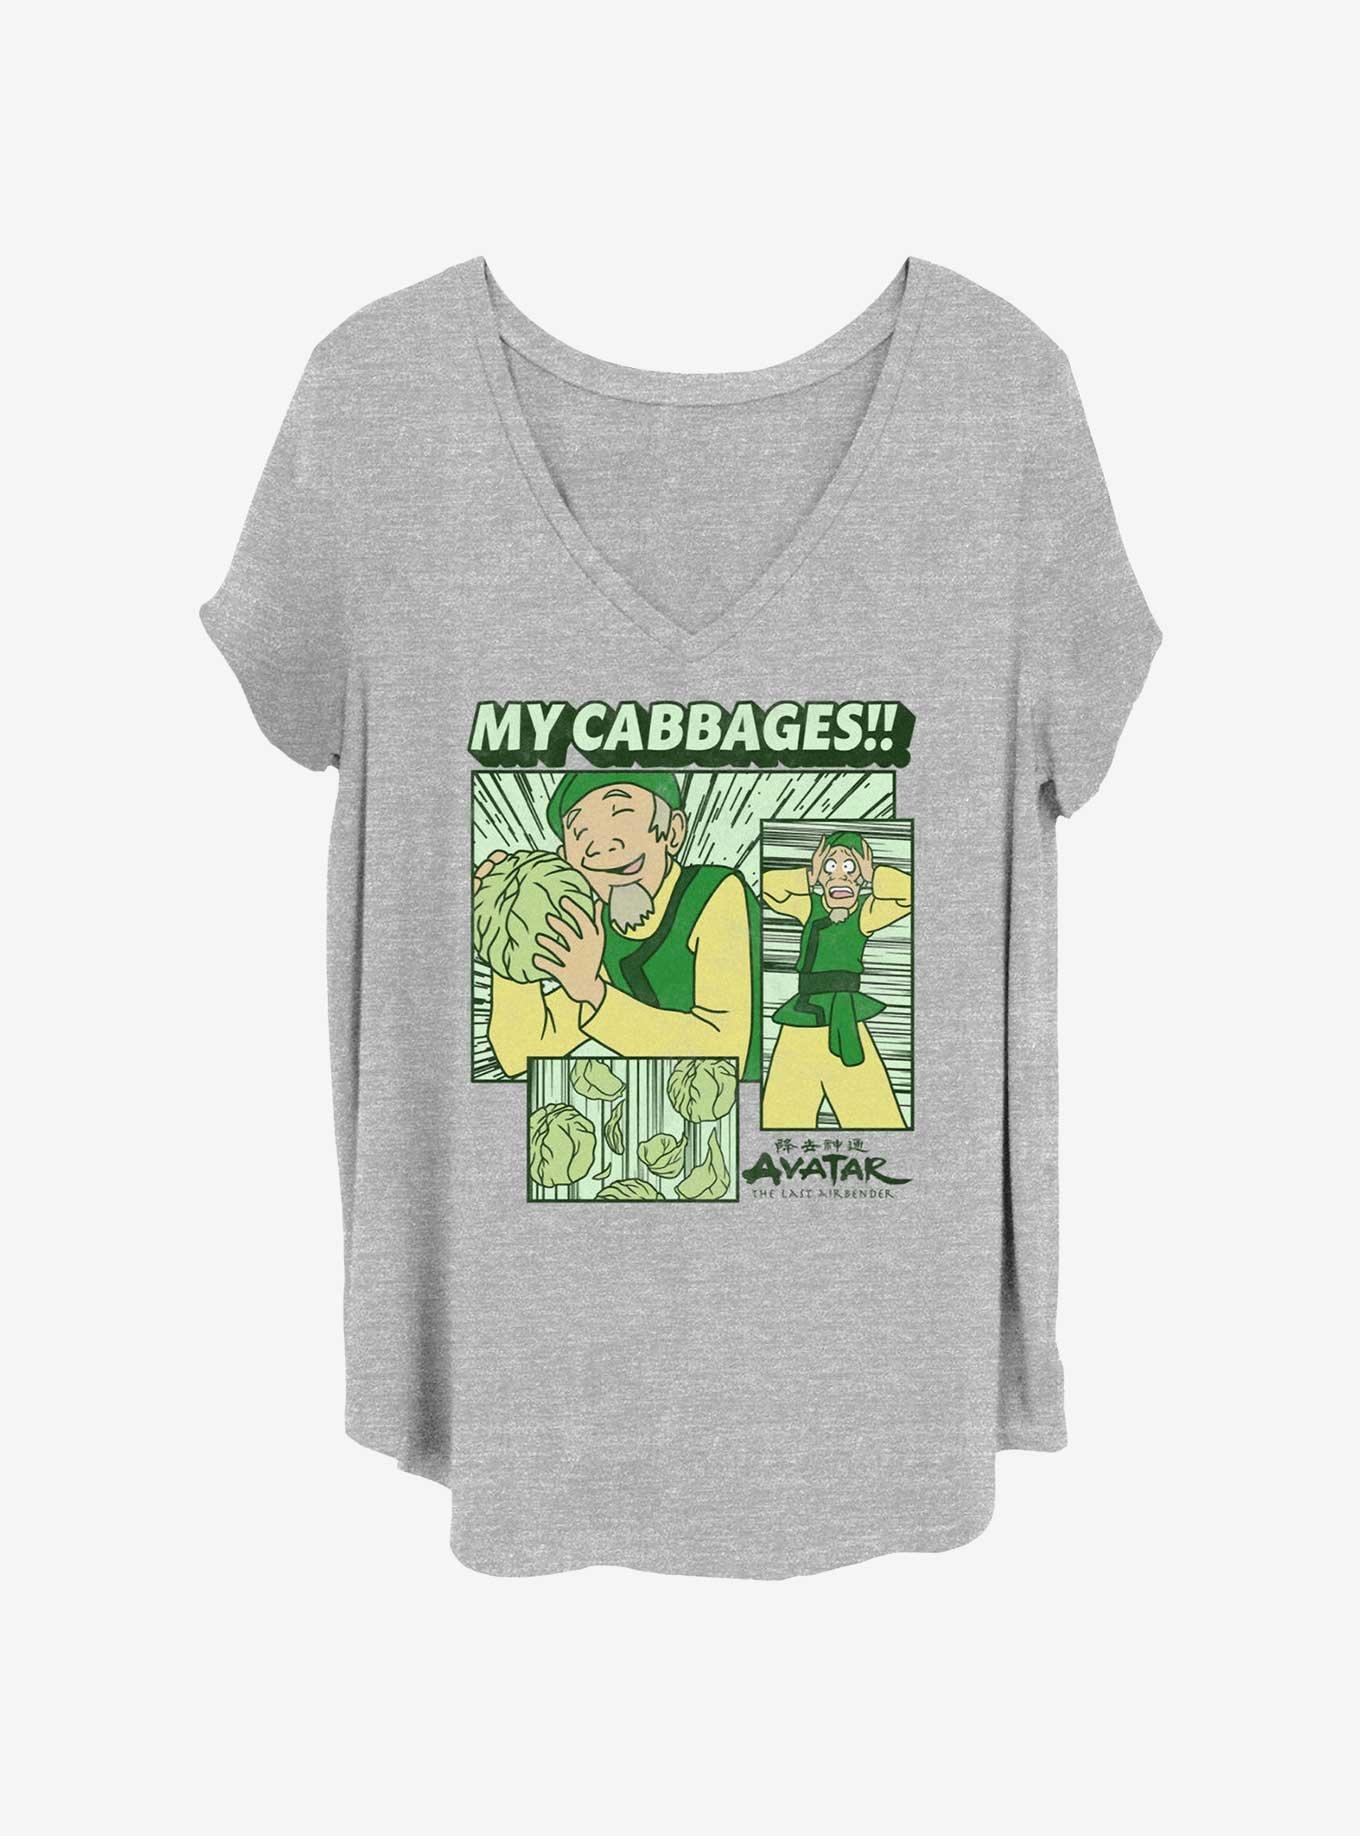 Avatar: The Last Airbender My Cabbages Girls T-Shirt Plus